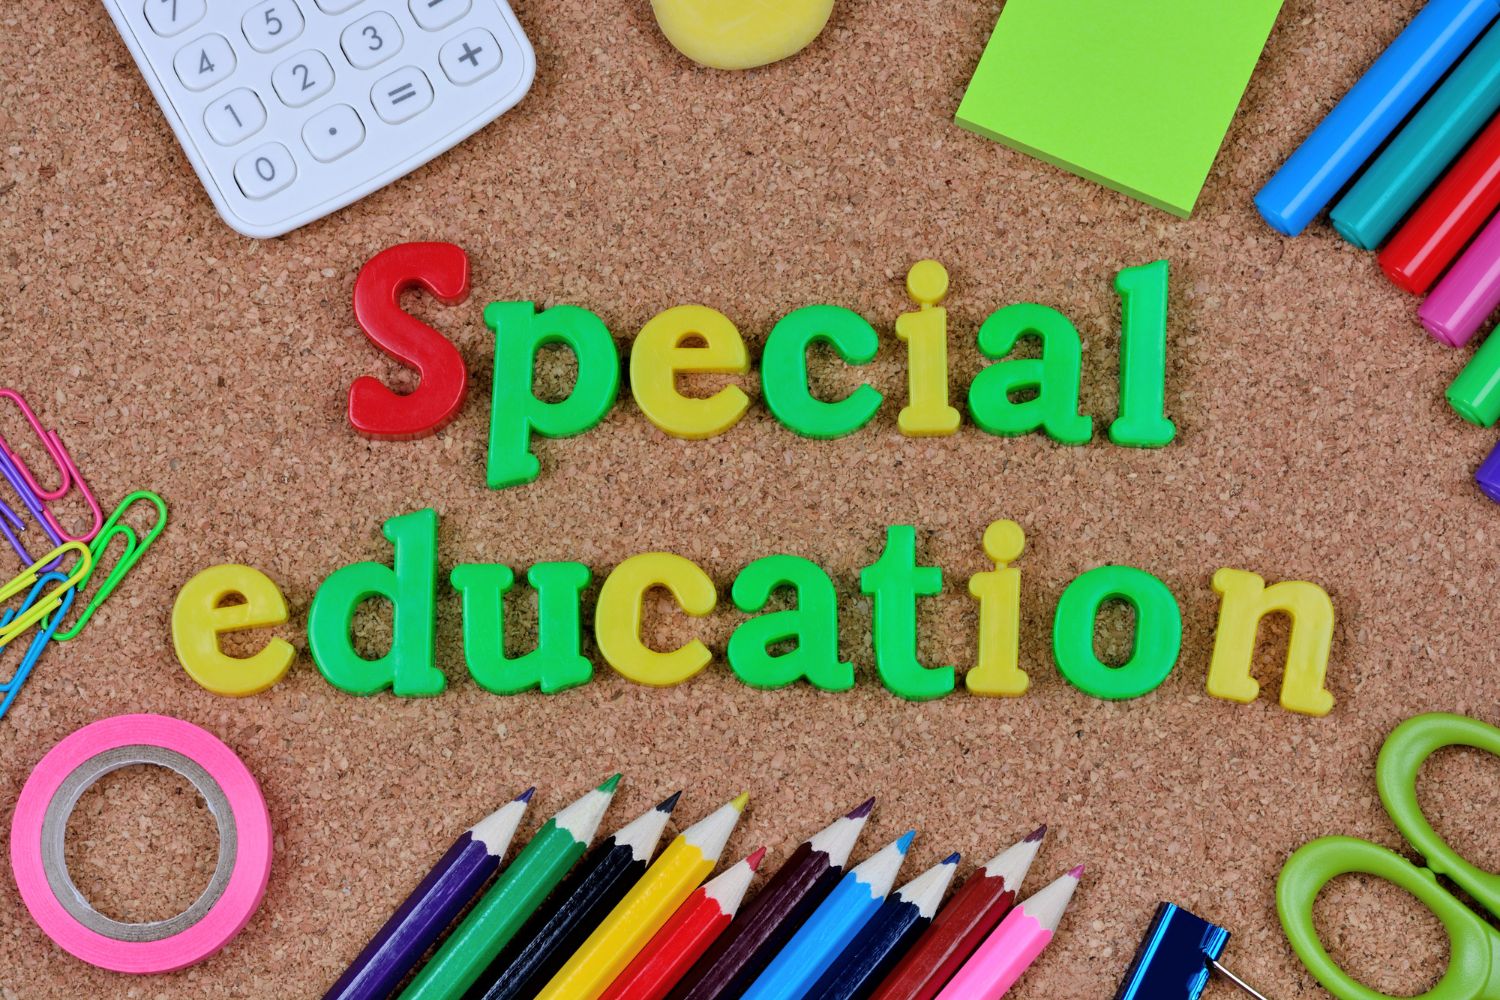 Special Education Teaching